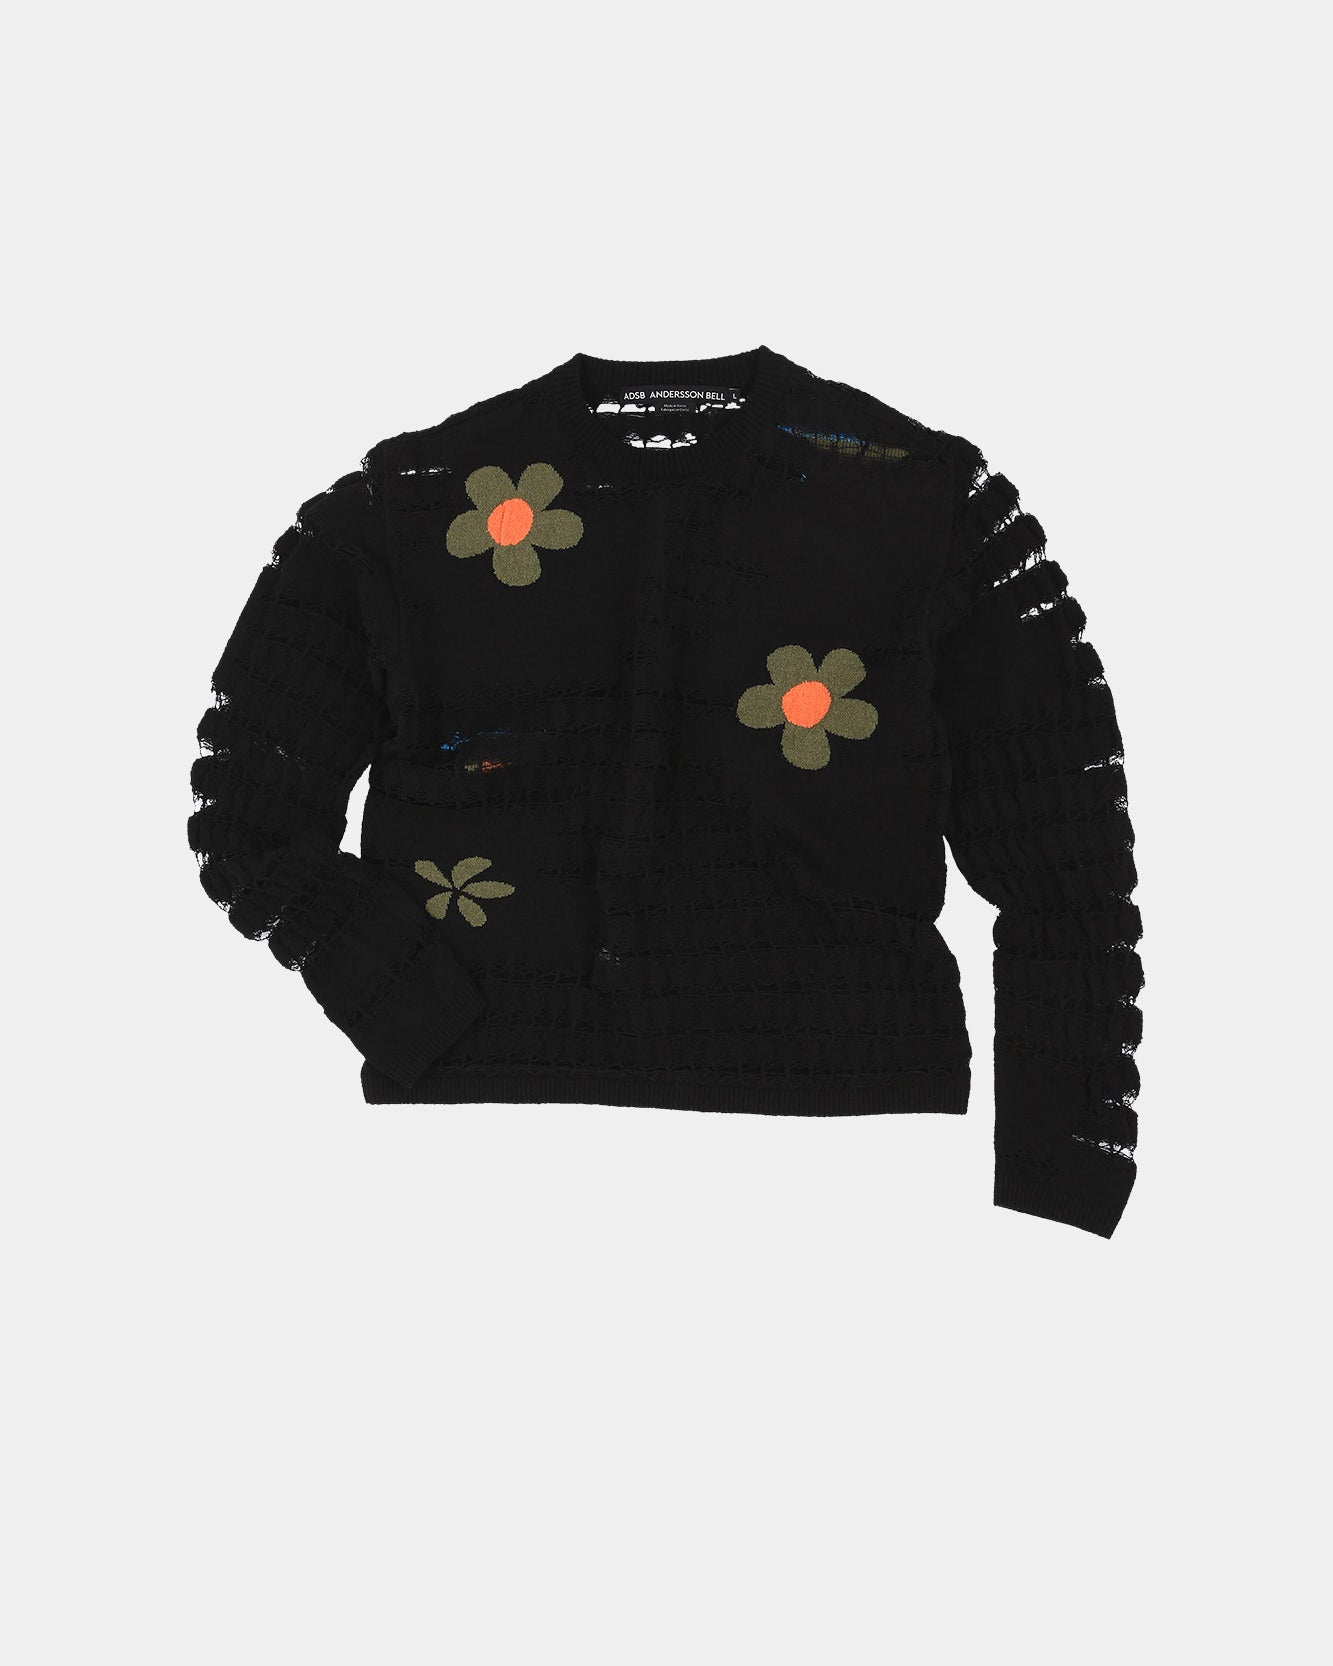 Andersson Bell FLOWER SHEER CREW-NECK SWEATER atb1059m(BLACK)